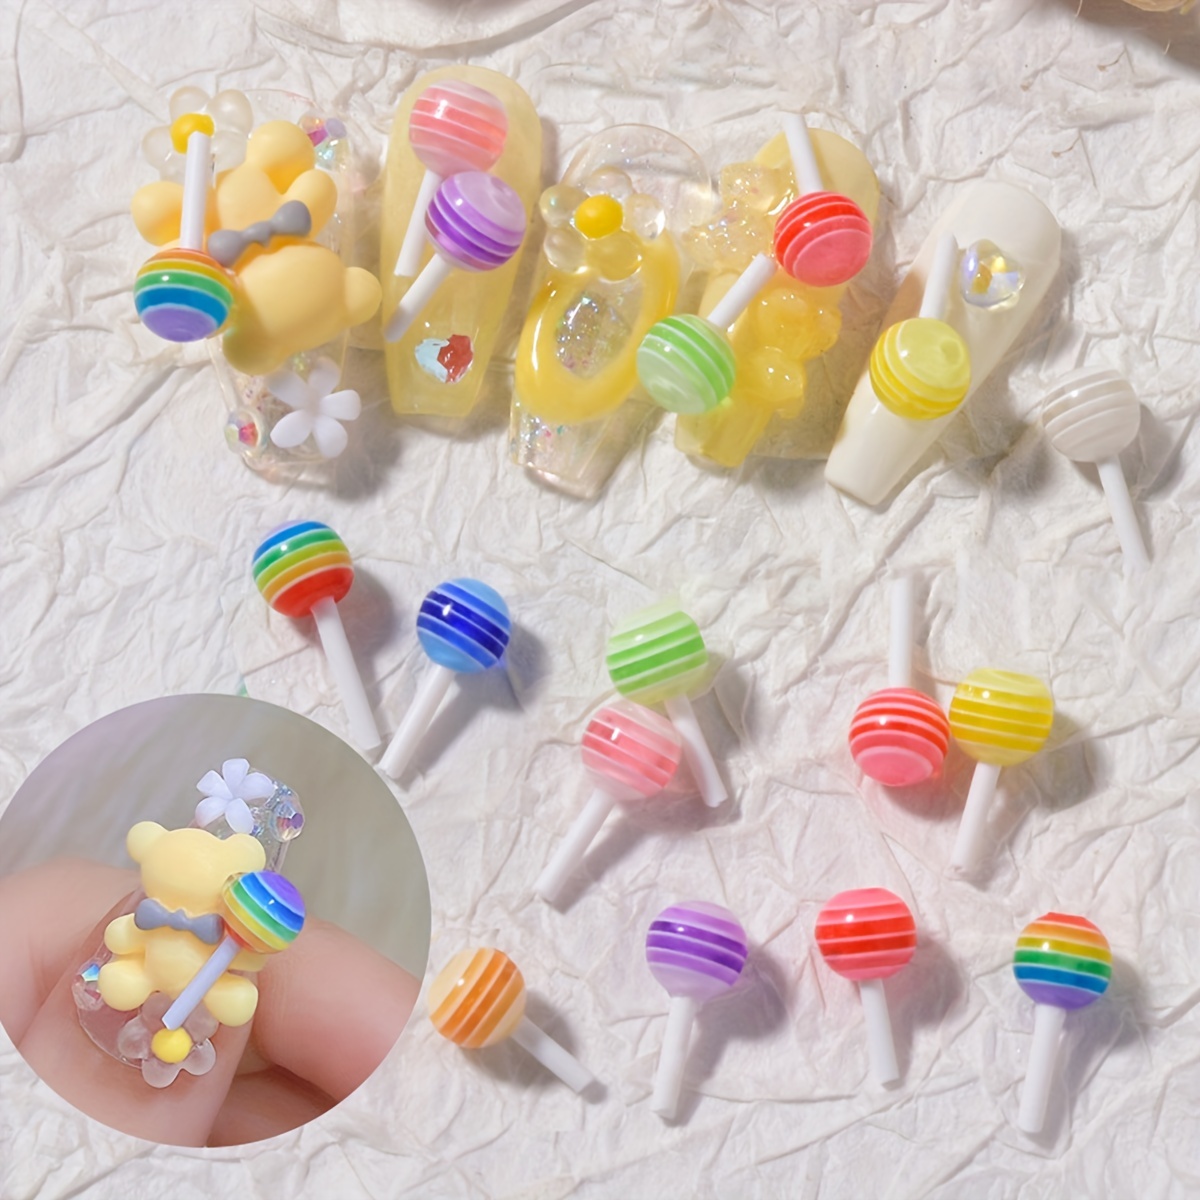  VILLCASE 35pcs Simulation Lollipop Clay Lollipop Charms Candy  Embellishments Mini Lollipop Decor Clay Swir Pops Earring Charms for  Earring Making Clay Lollipop Prop Polymer Clay Child Cream : Toys & Games